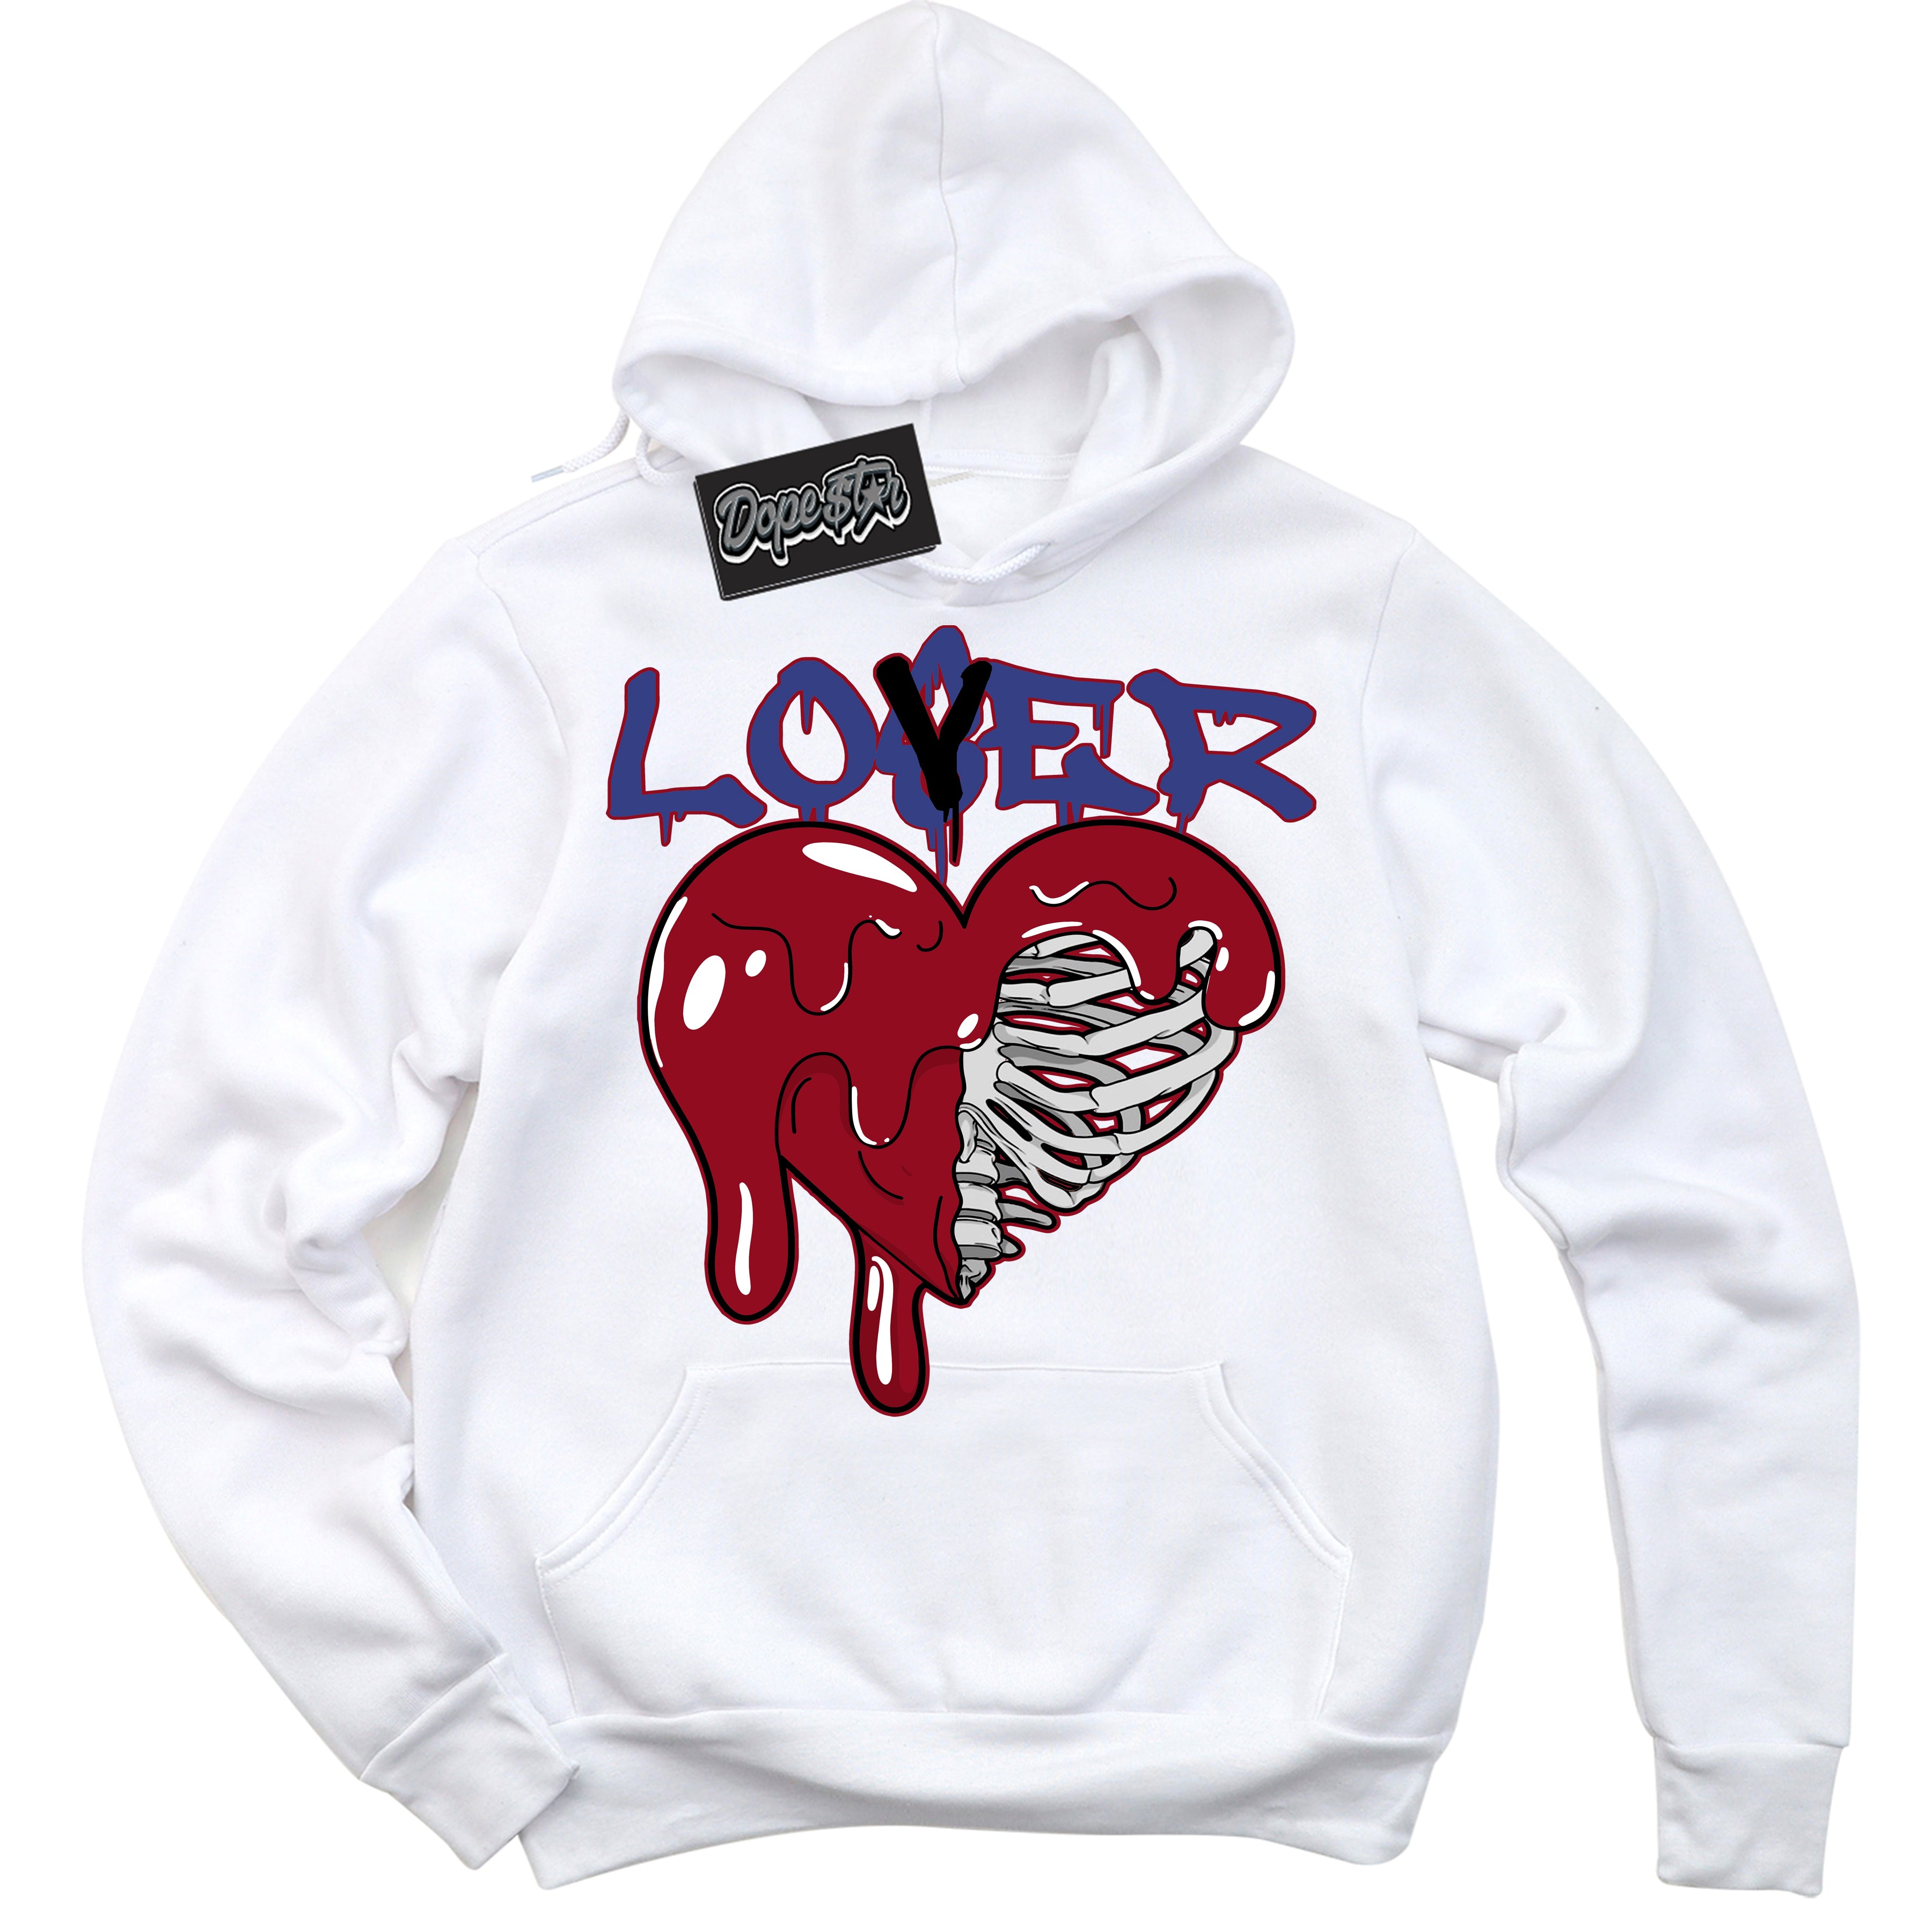 Cool White Hoodie with “ Lover Loser ”  design that Perfectly Matches Playoffs 8s Sneakers.